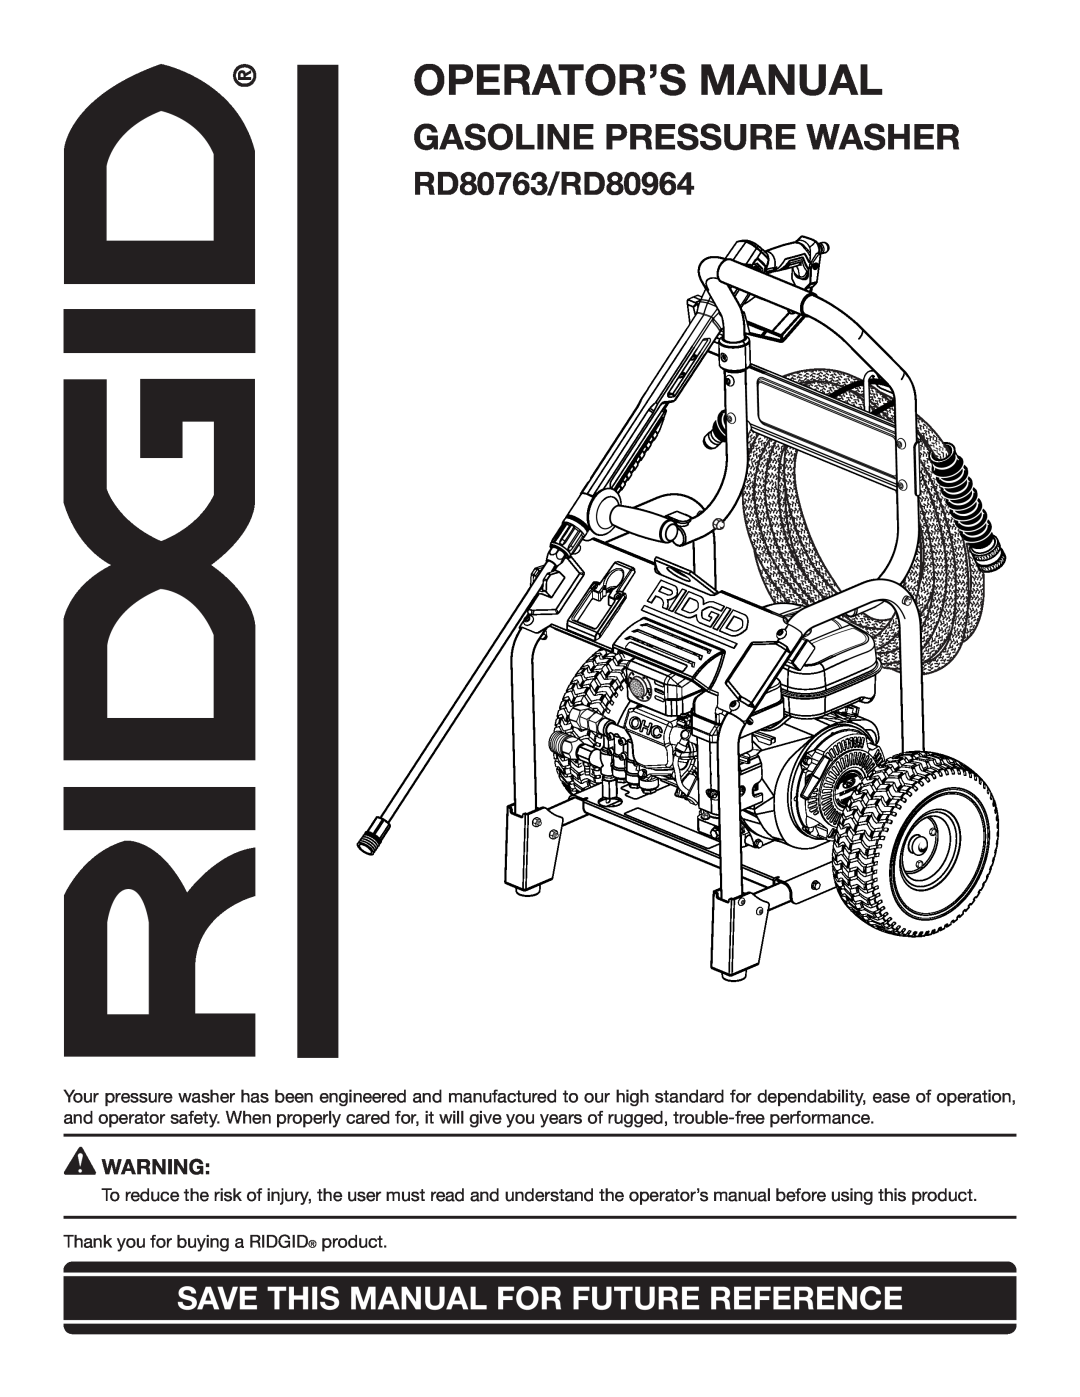 RIDGID manual Operator’S Manual, GASOLINE pressure washer, RD80763/RD80964, Save This Manual For Future Reference 